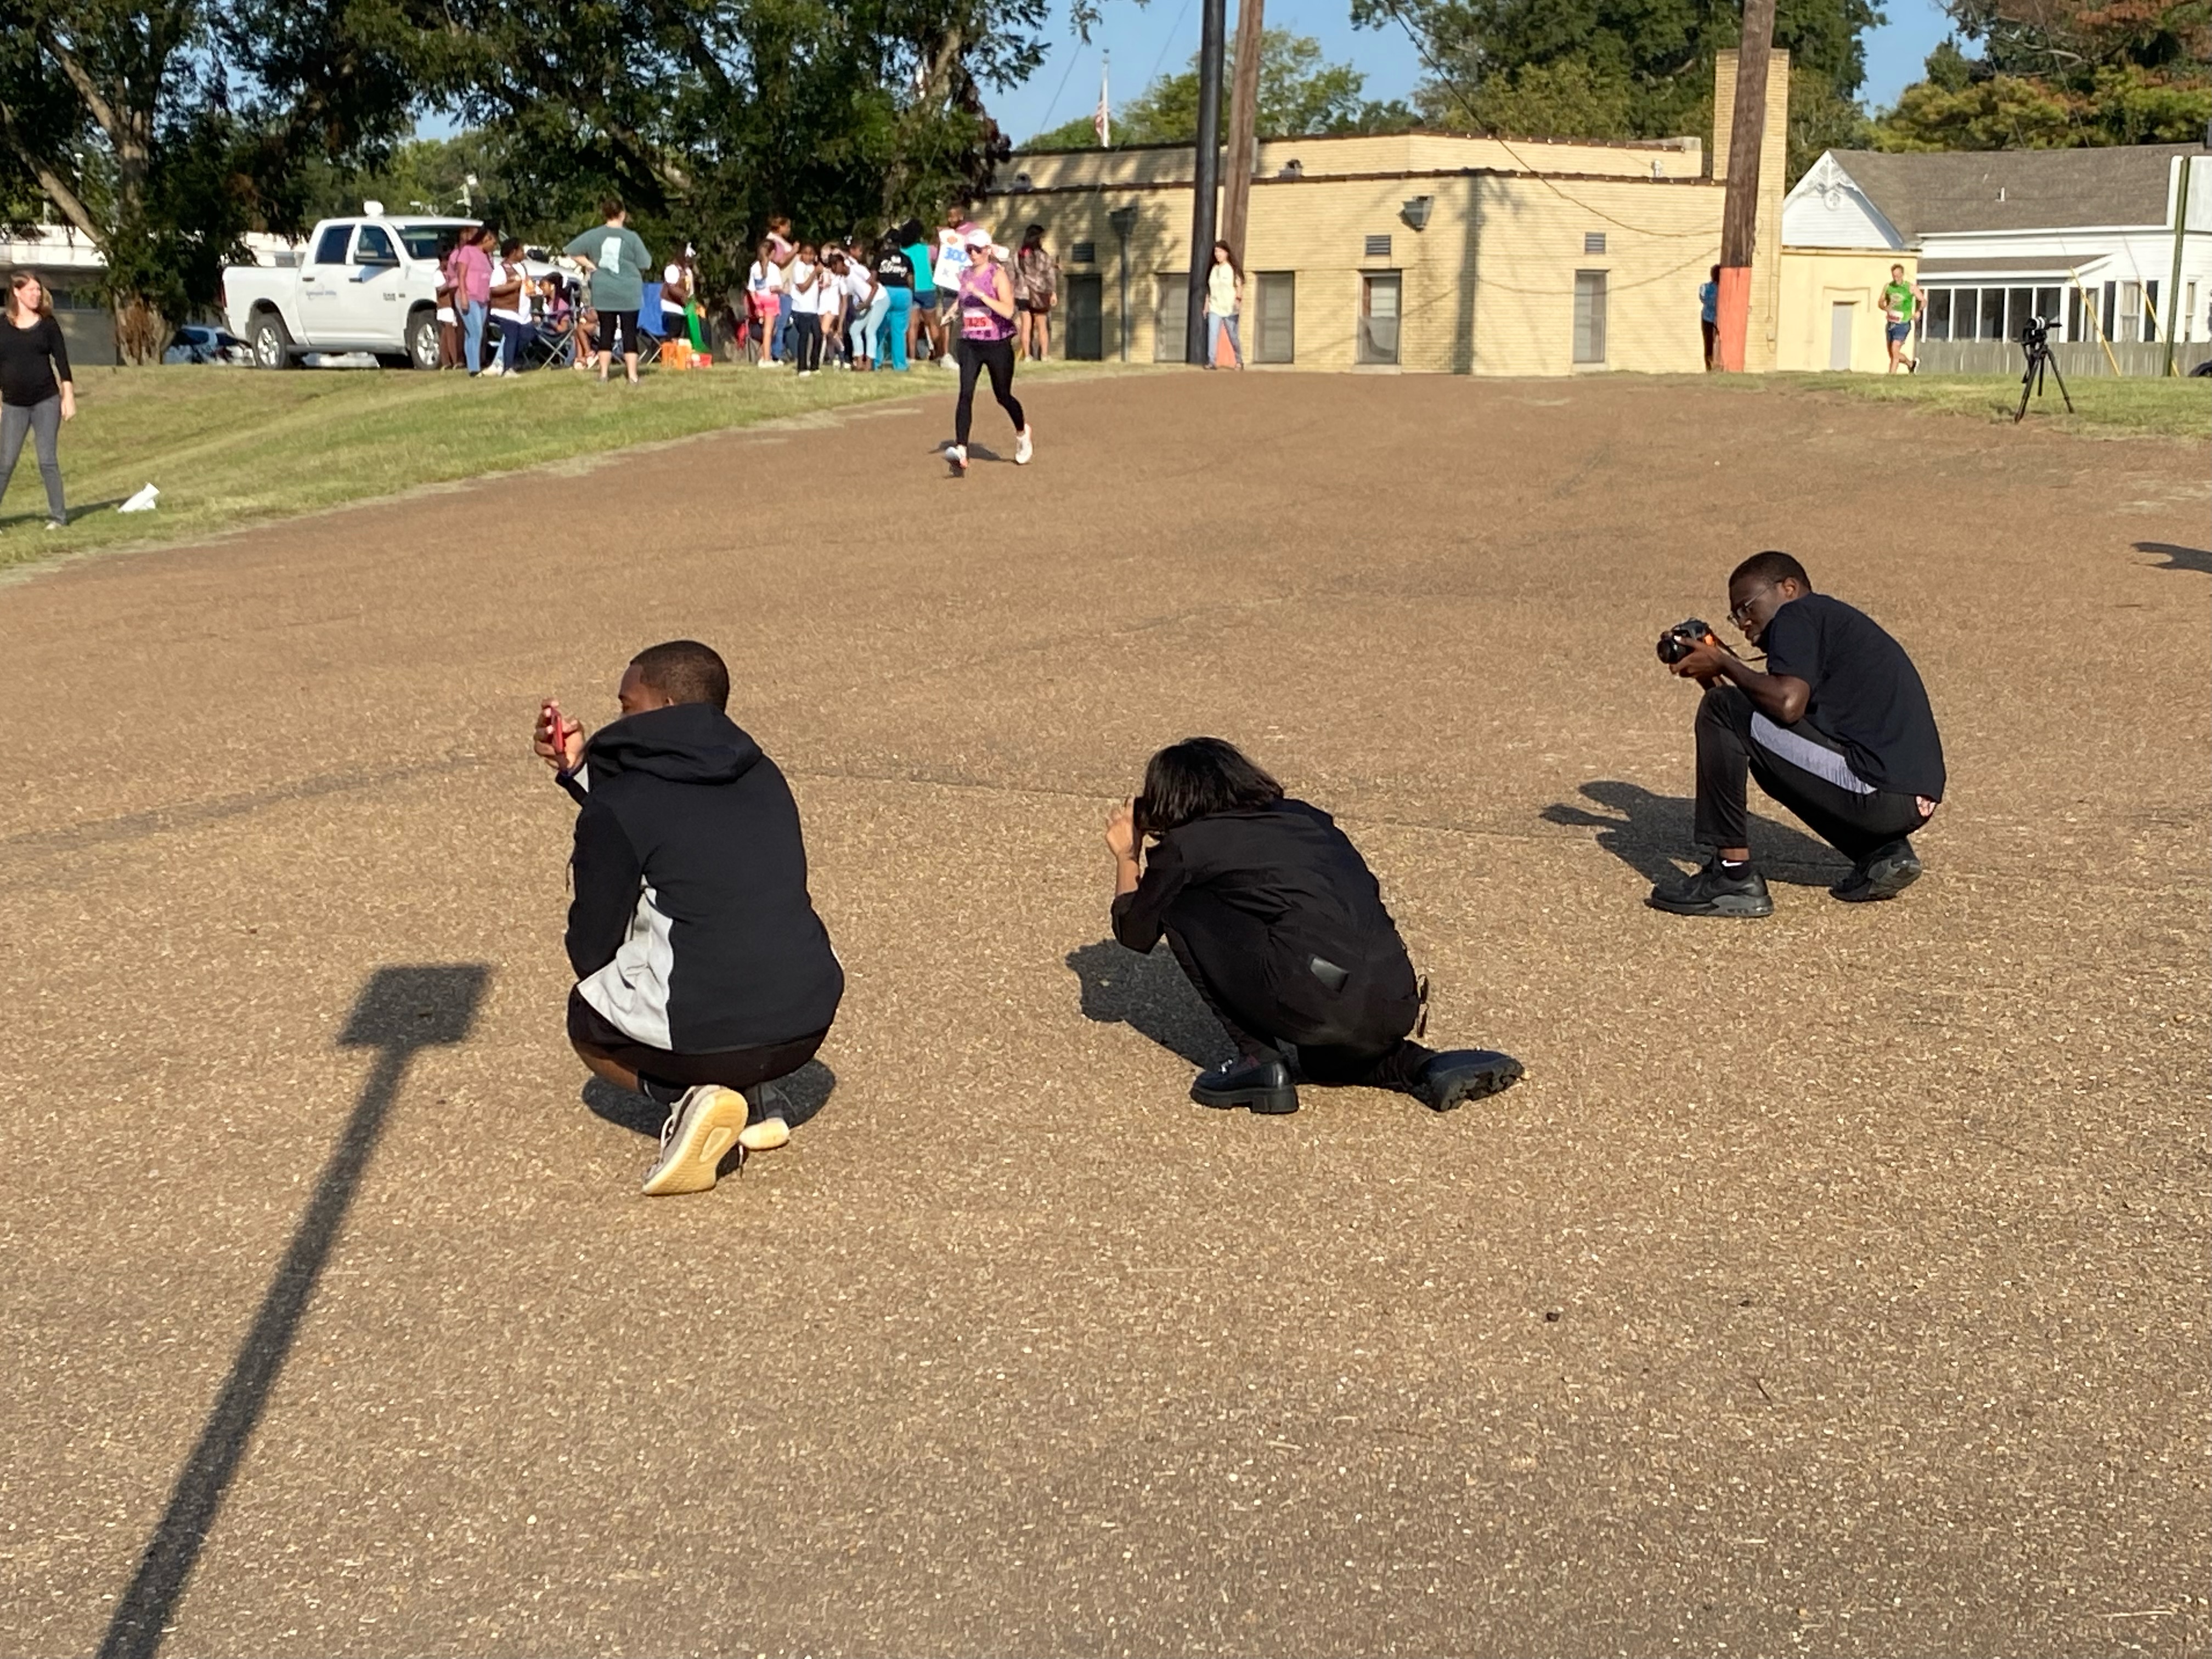 Digital Media students capture the action at the 300 Oak Race